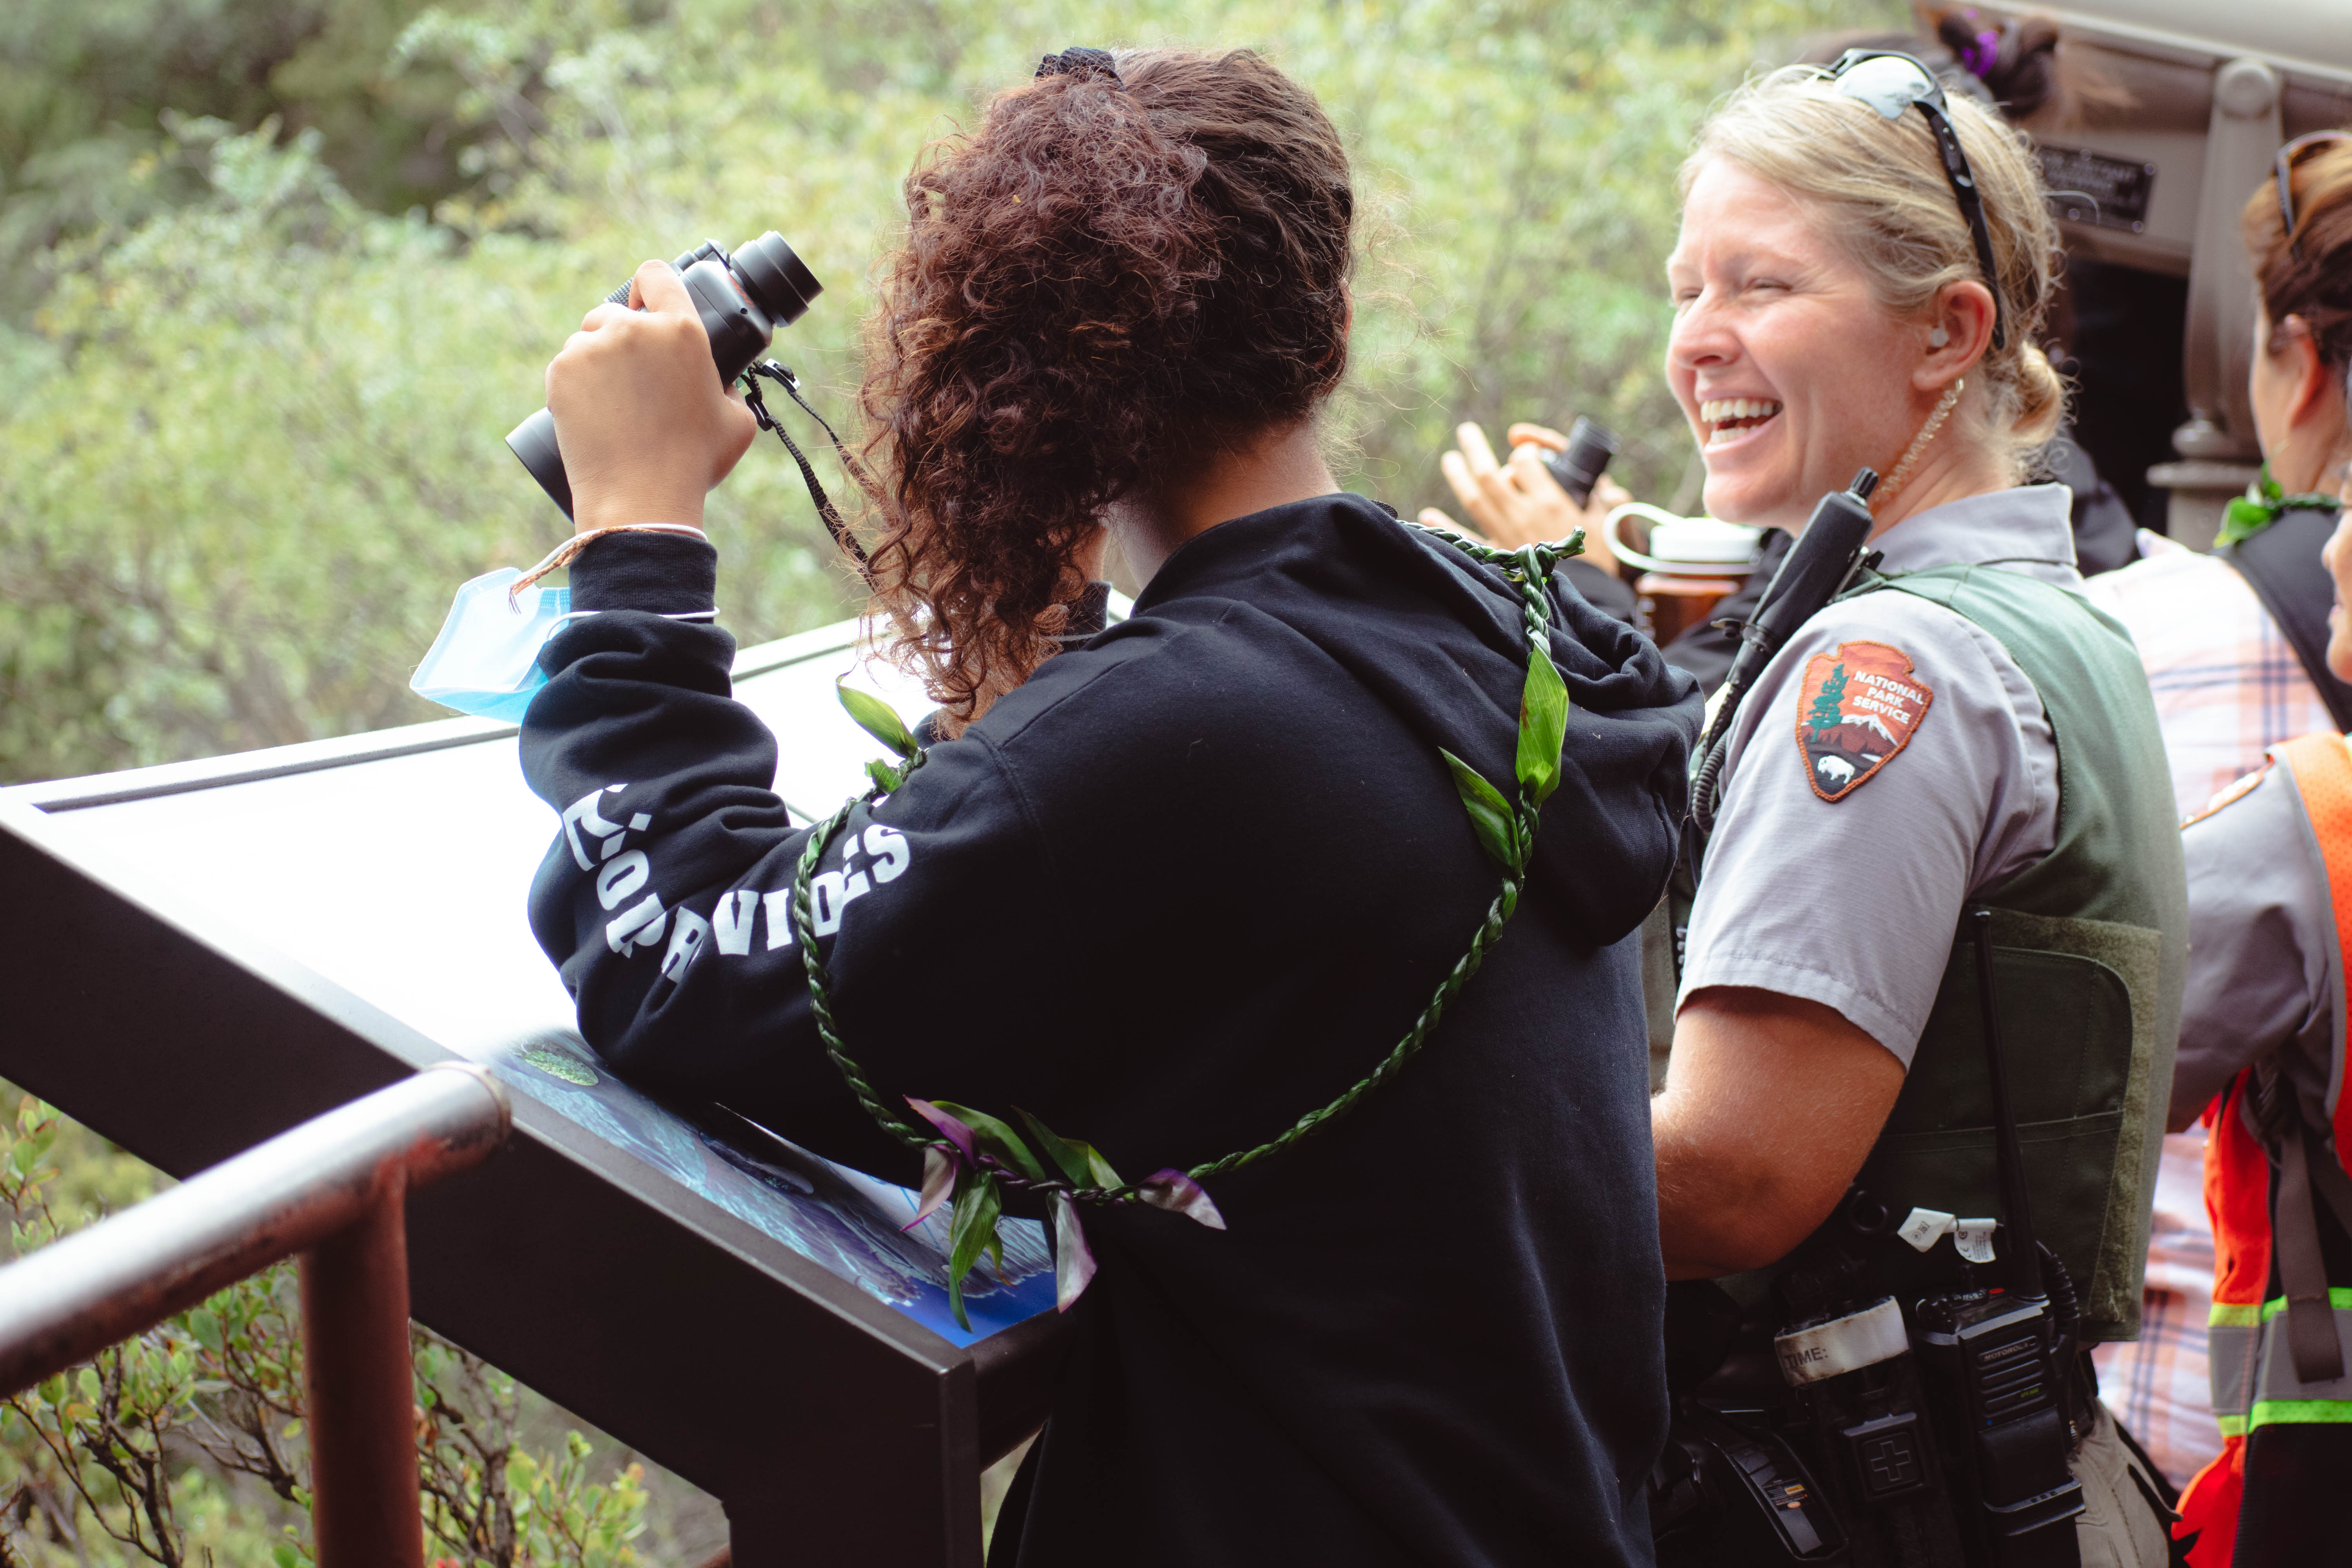 Ranger smiles and interacts with visitor at overlook